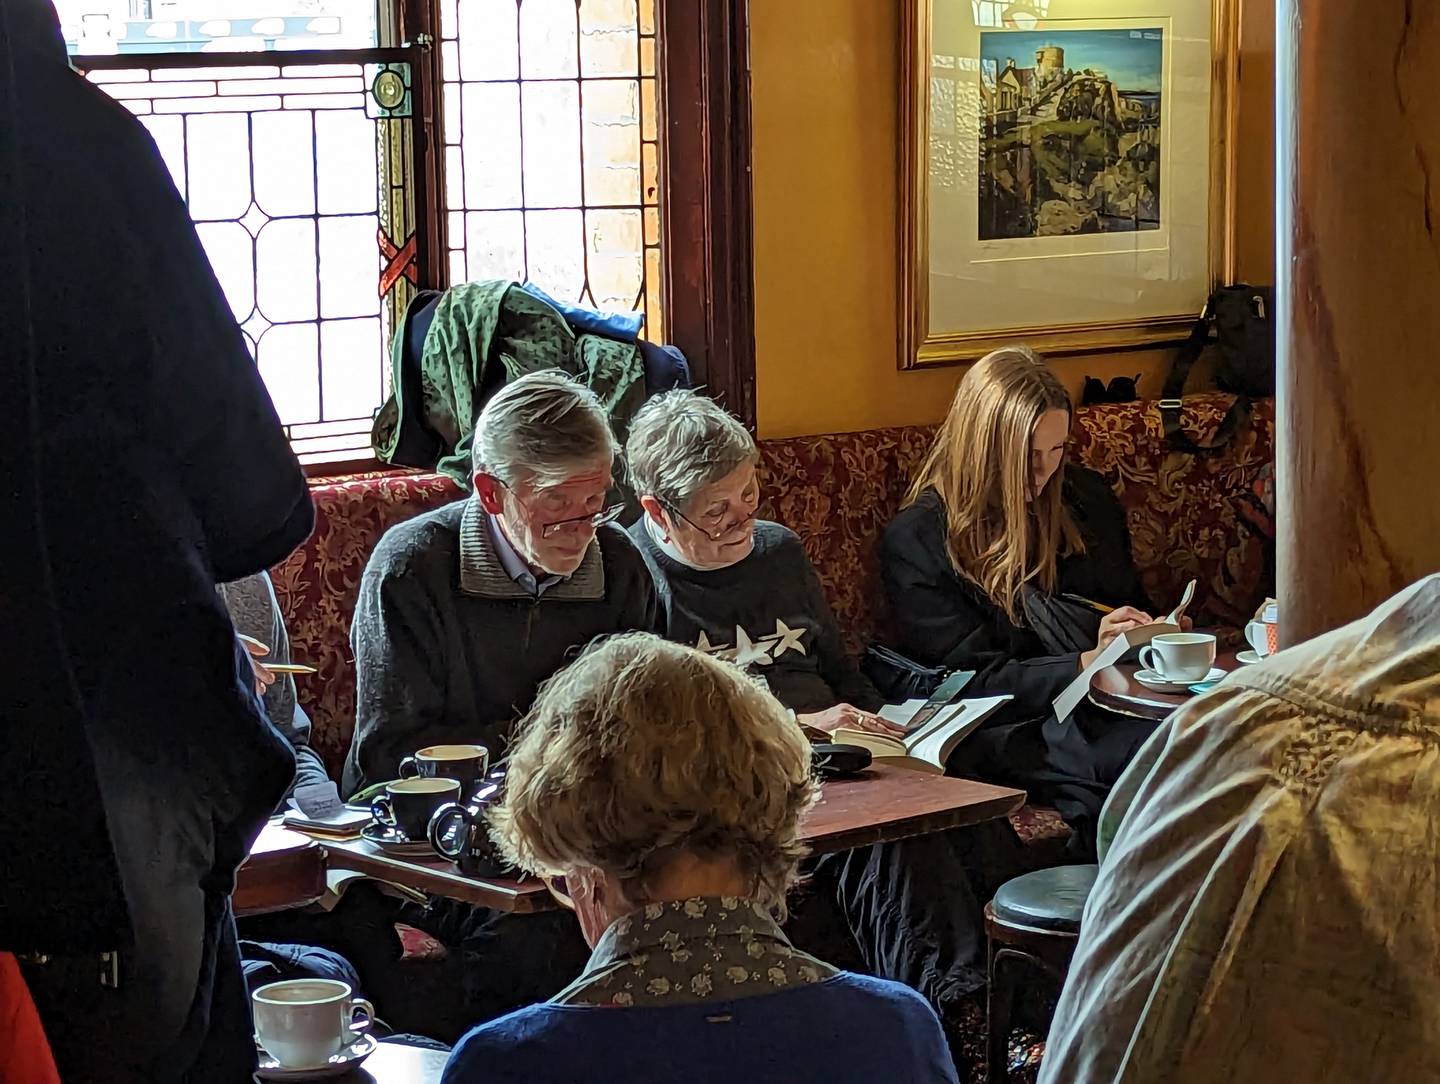 Robert Walsh, a member of the Friends of Joyce Tower in Sandycove, Ireland, leads a reading of "Finnegans Wake" by James Joyce in the Charles Fitzgerald pub.